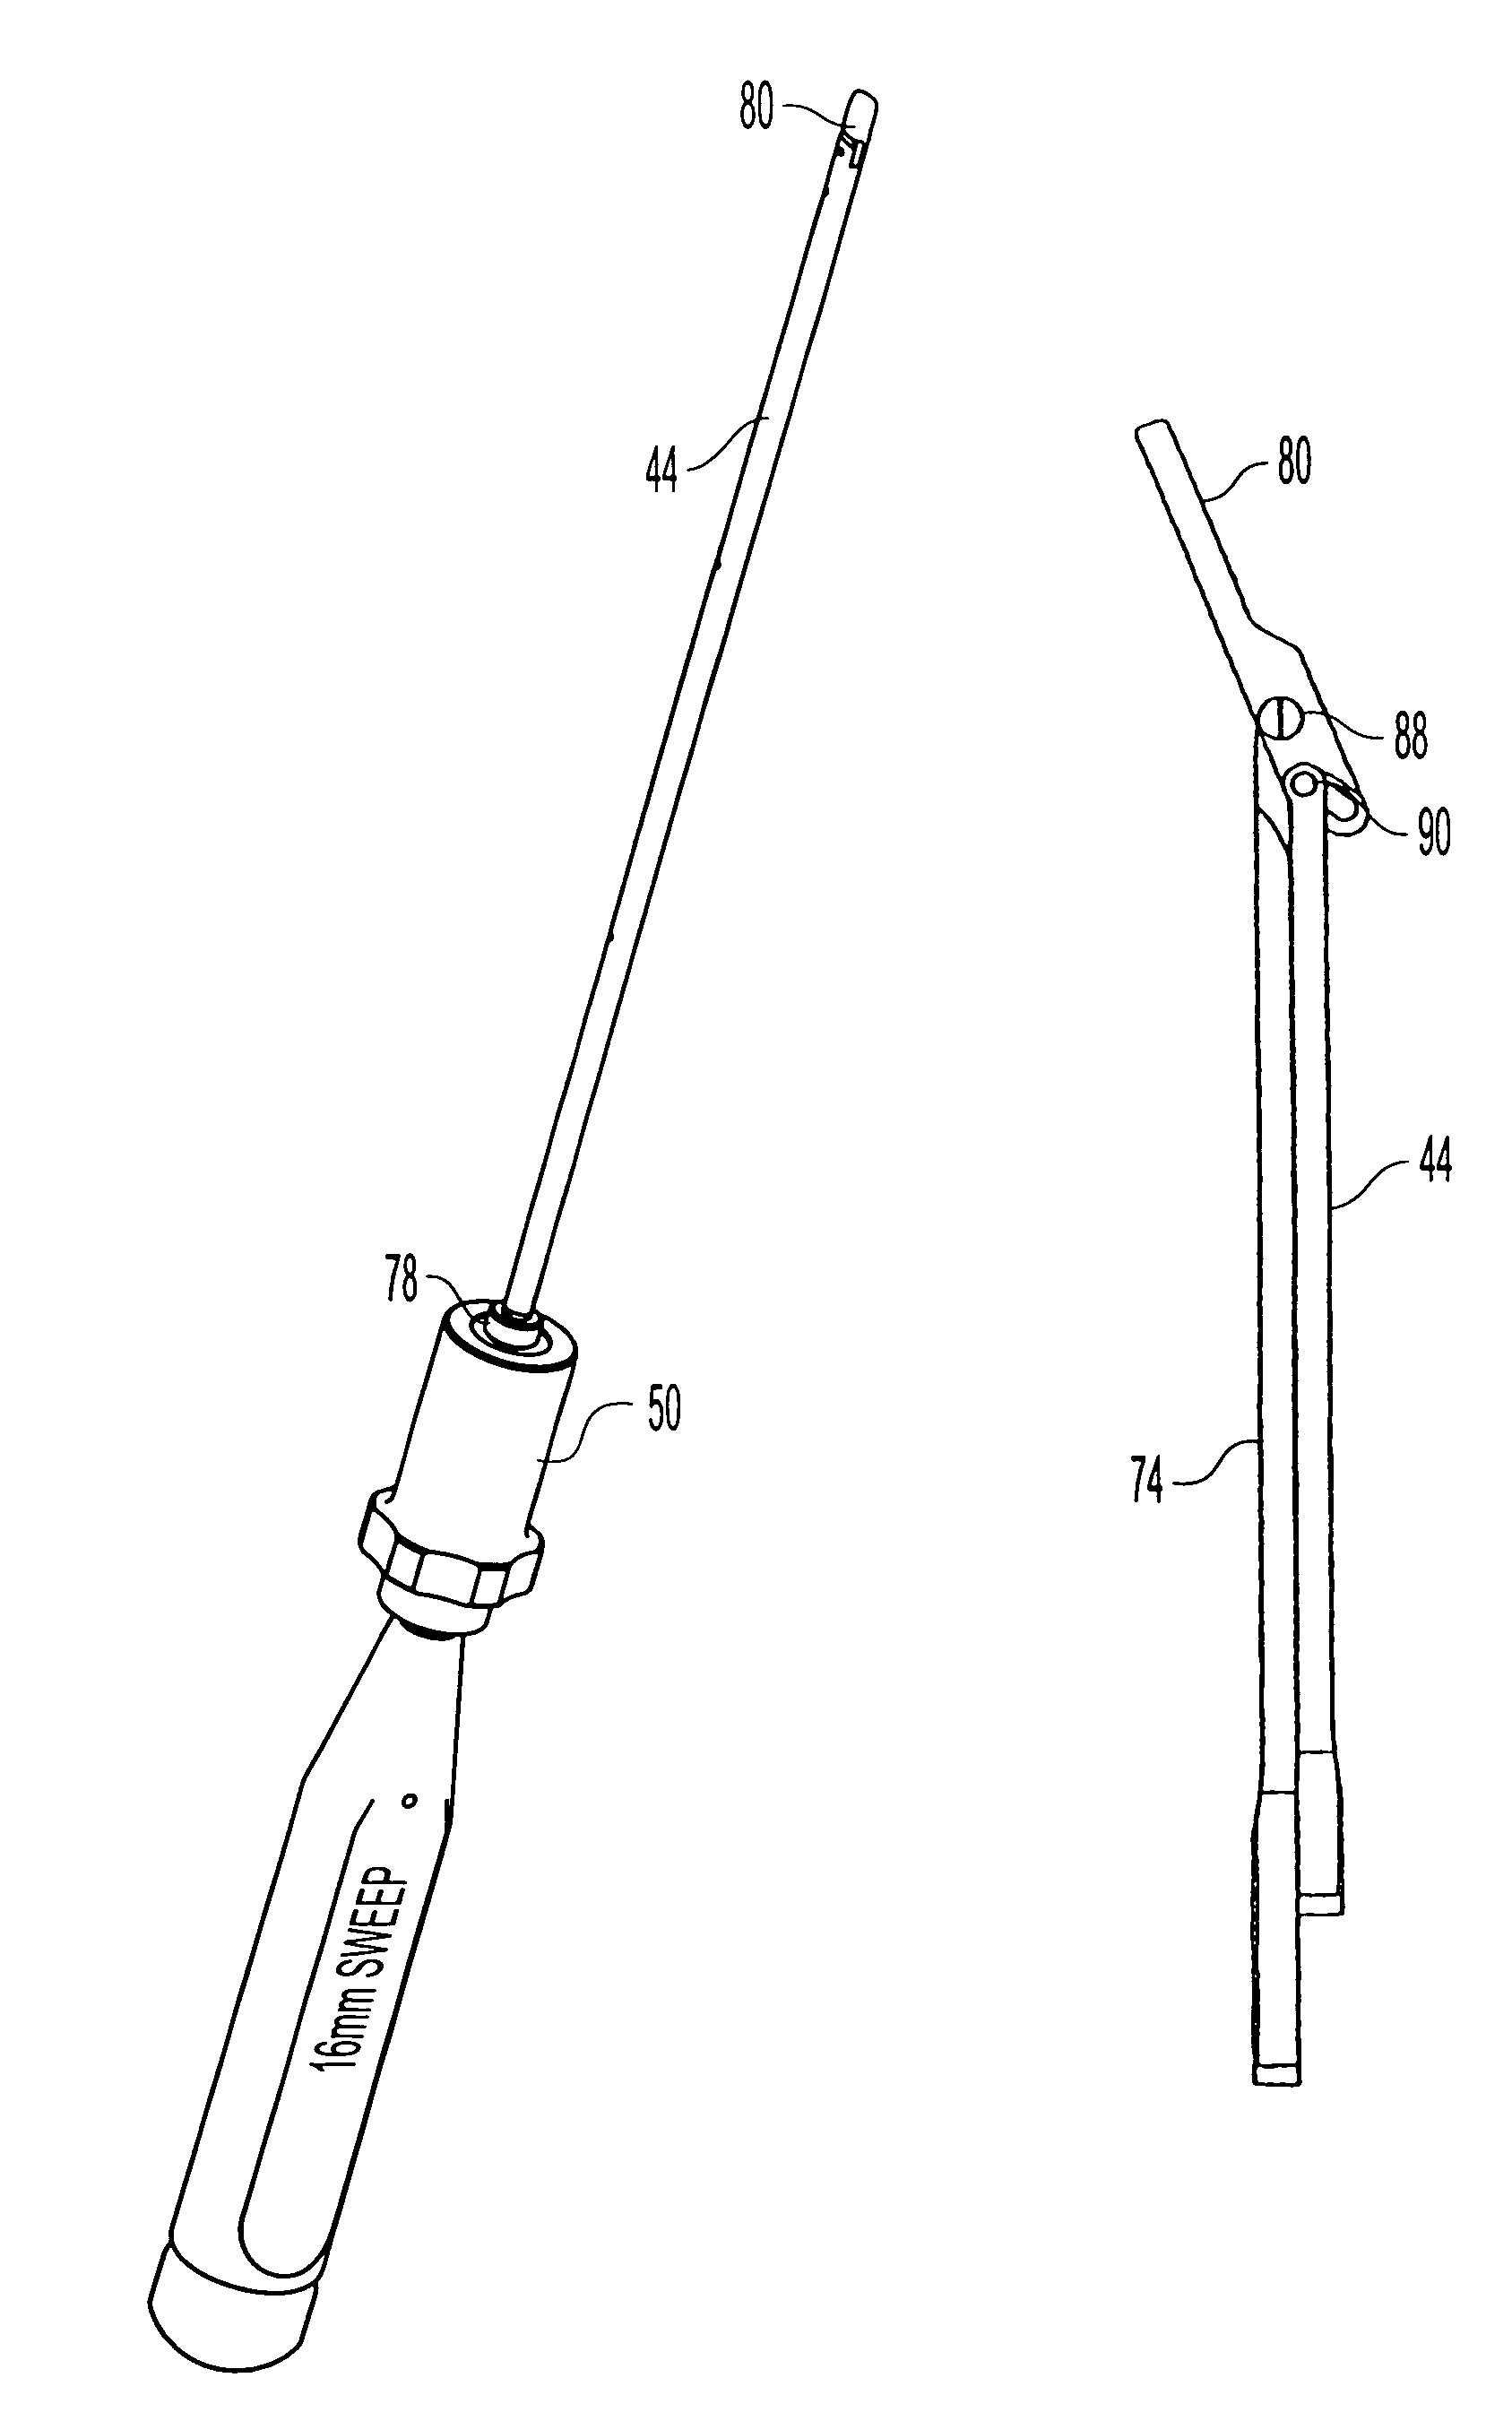 Tools and methods for creating cavities in bone